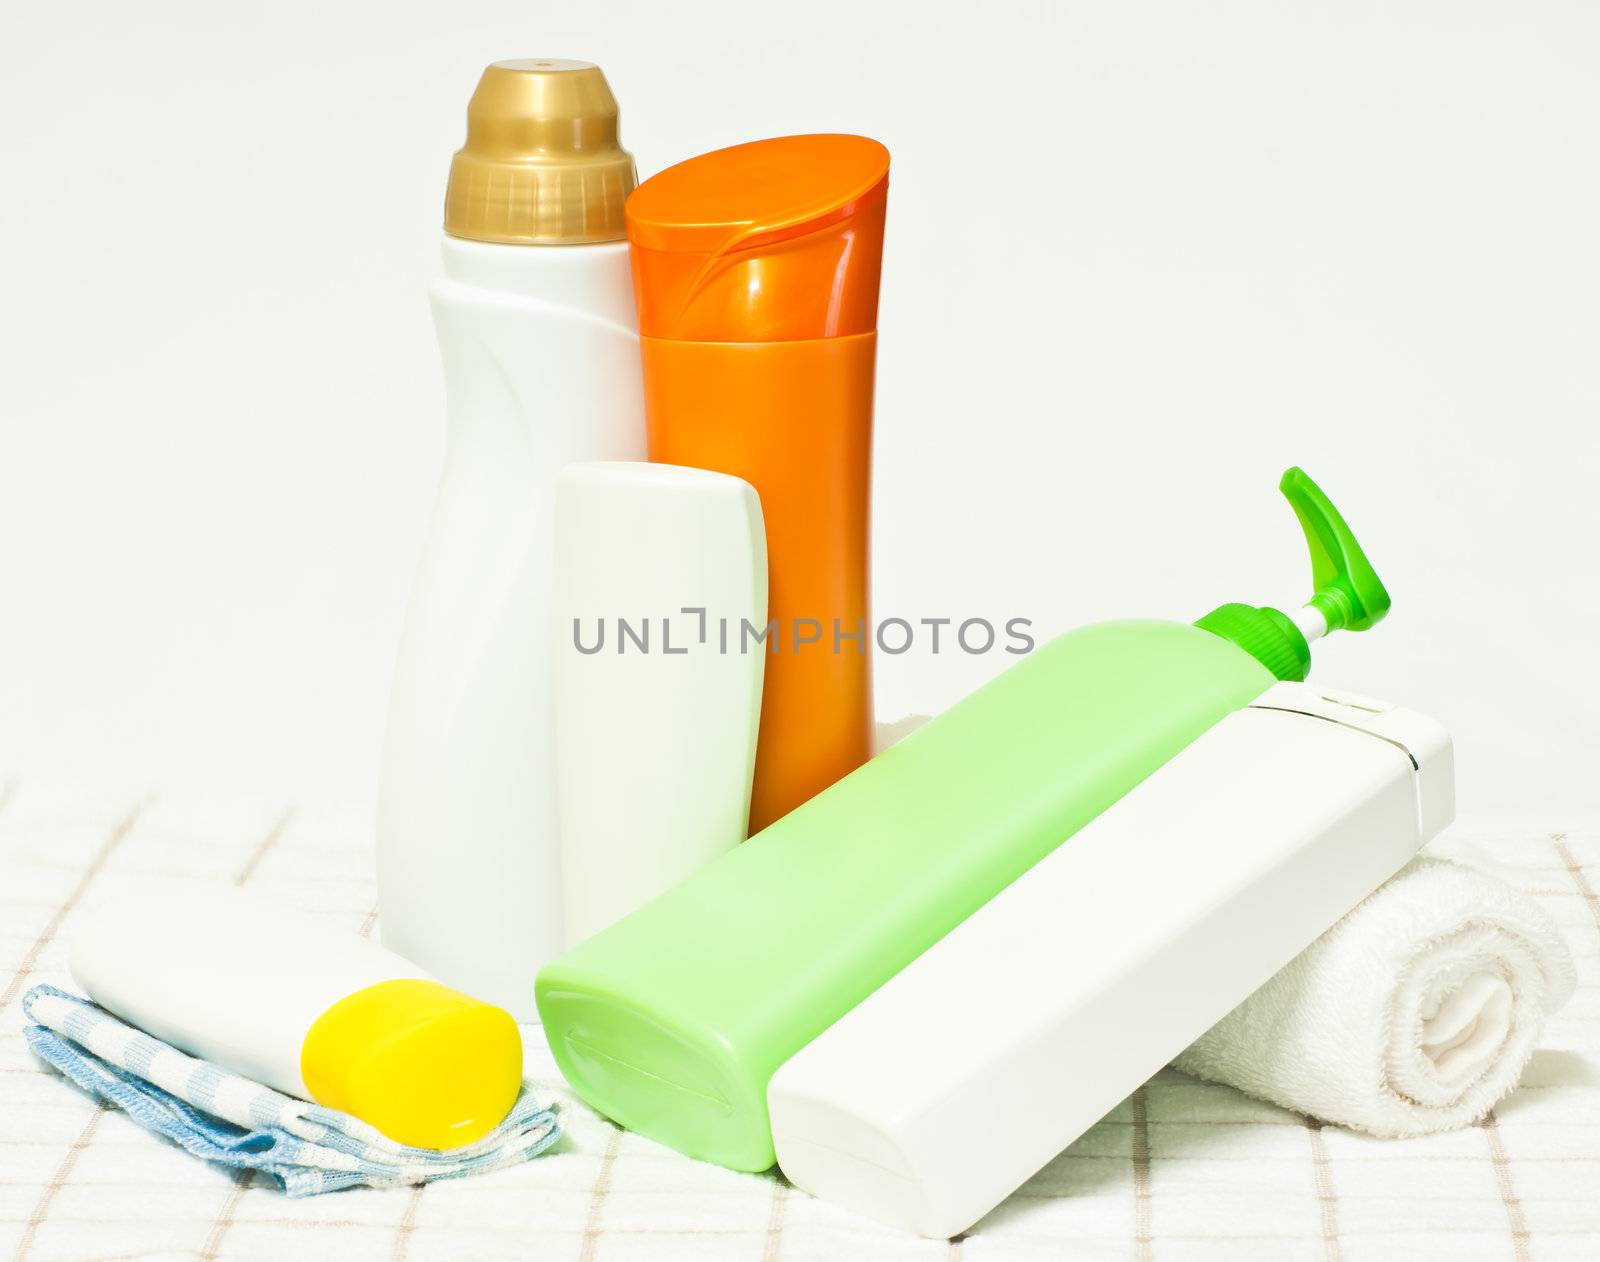 hygiene products as necessary and good for you